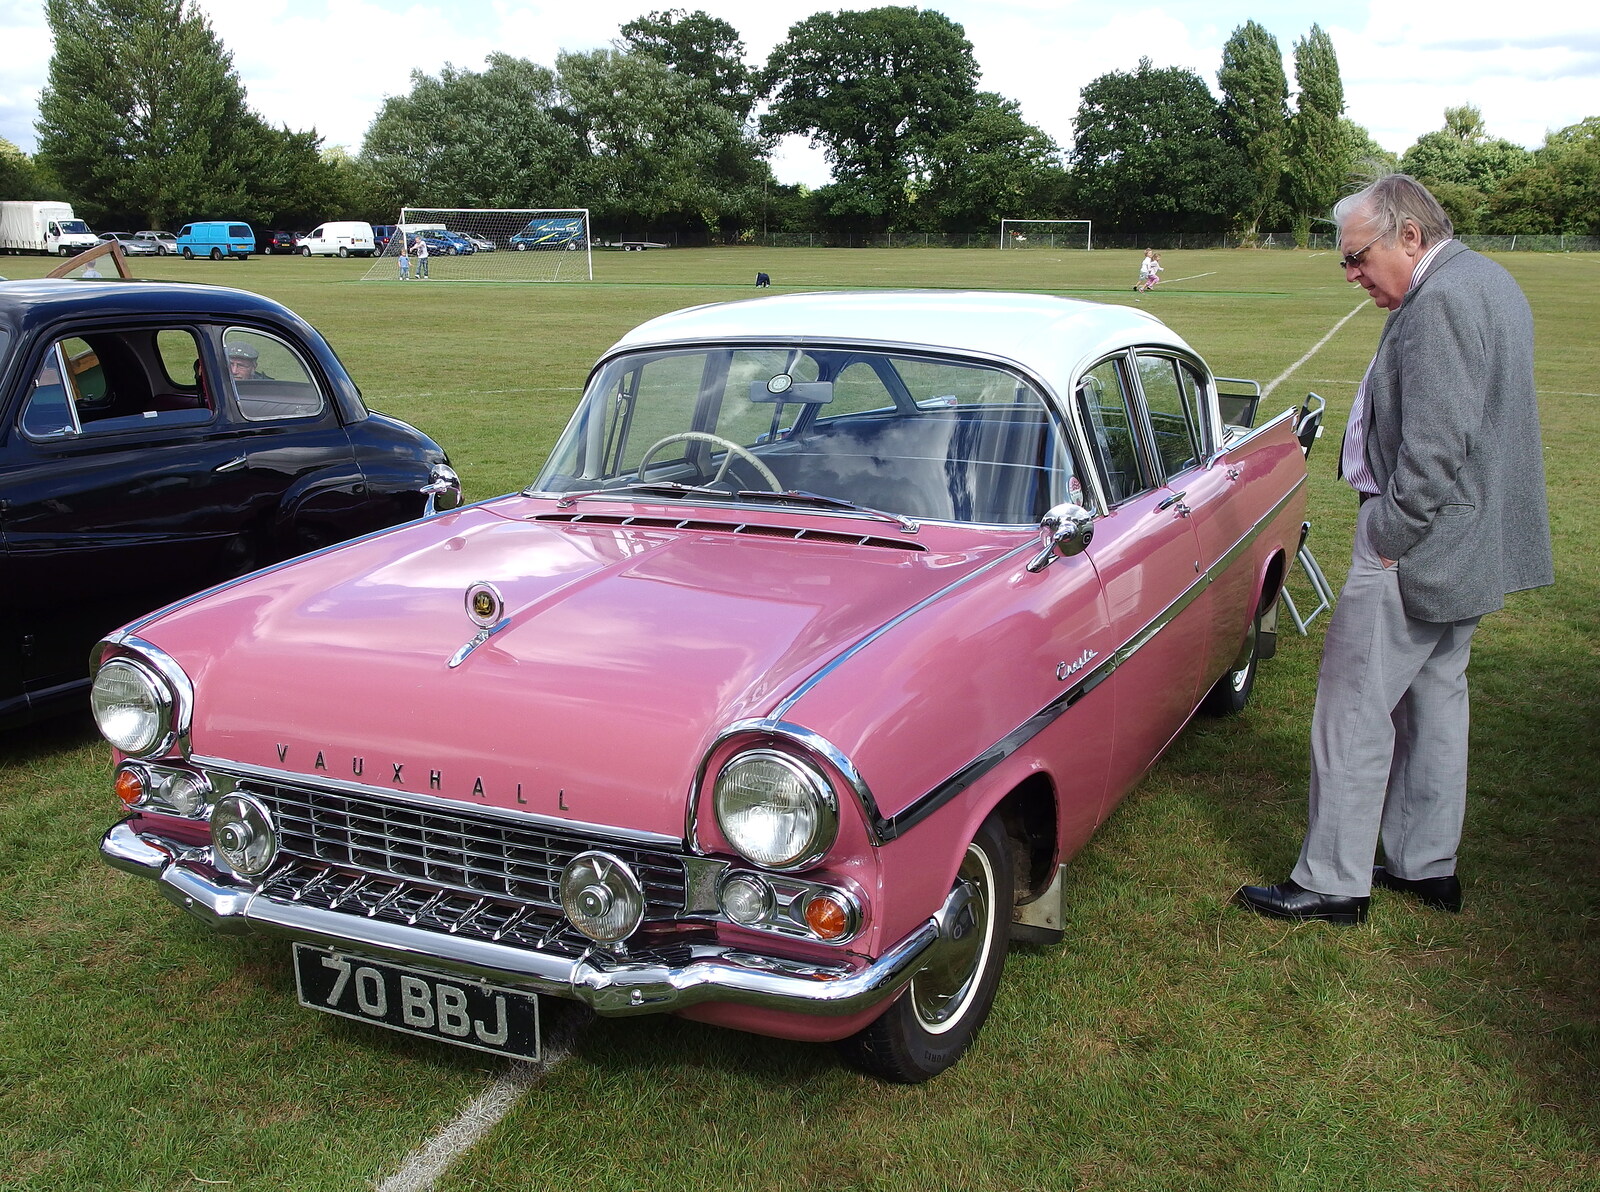 A pink 1950s Vauxhall is inspected from Stradbroke Classic Car Show, Stradbroke, Suffolk - 7th September 2013